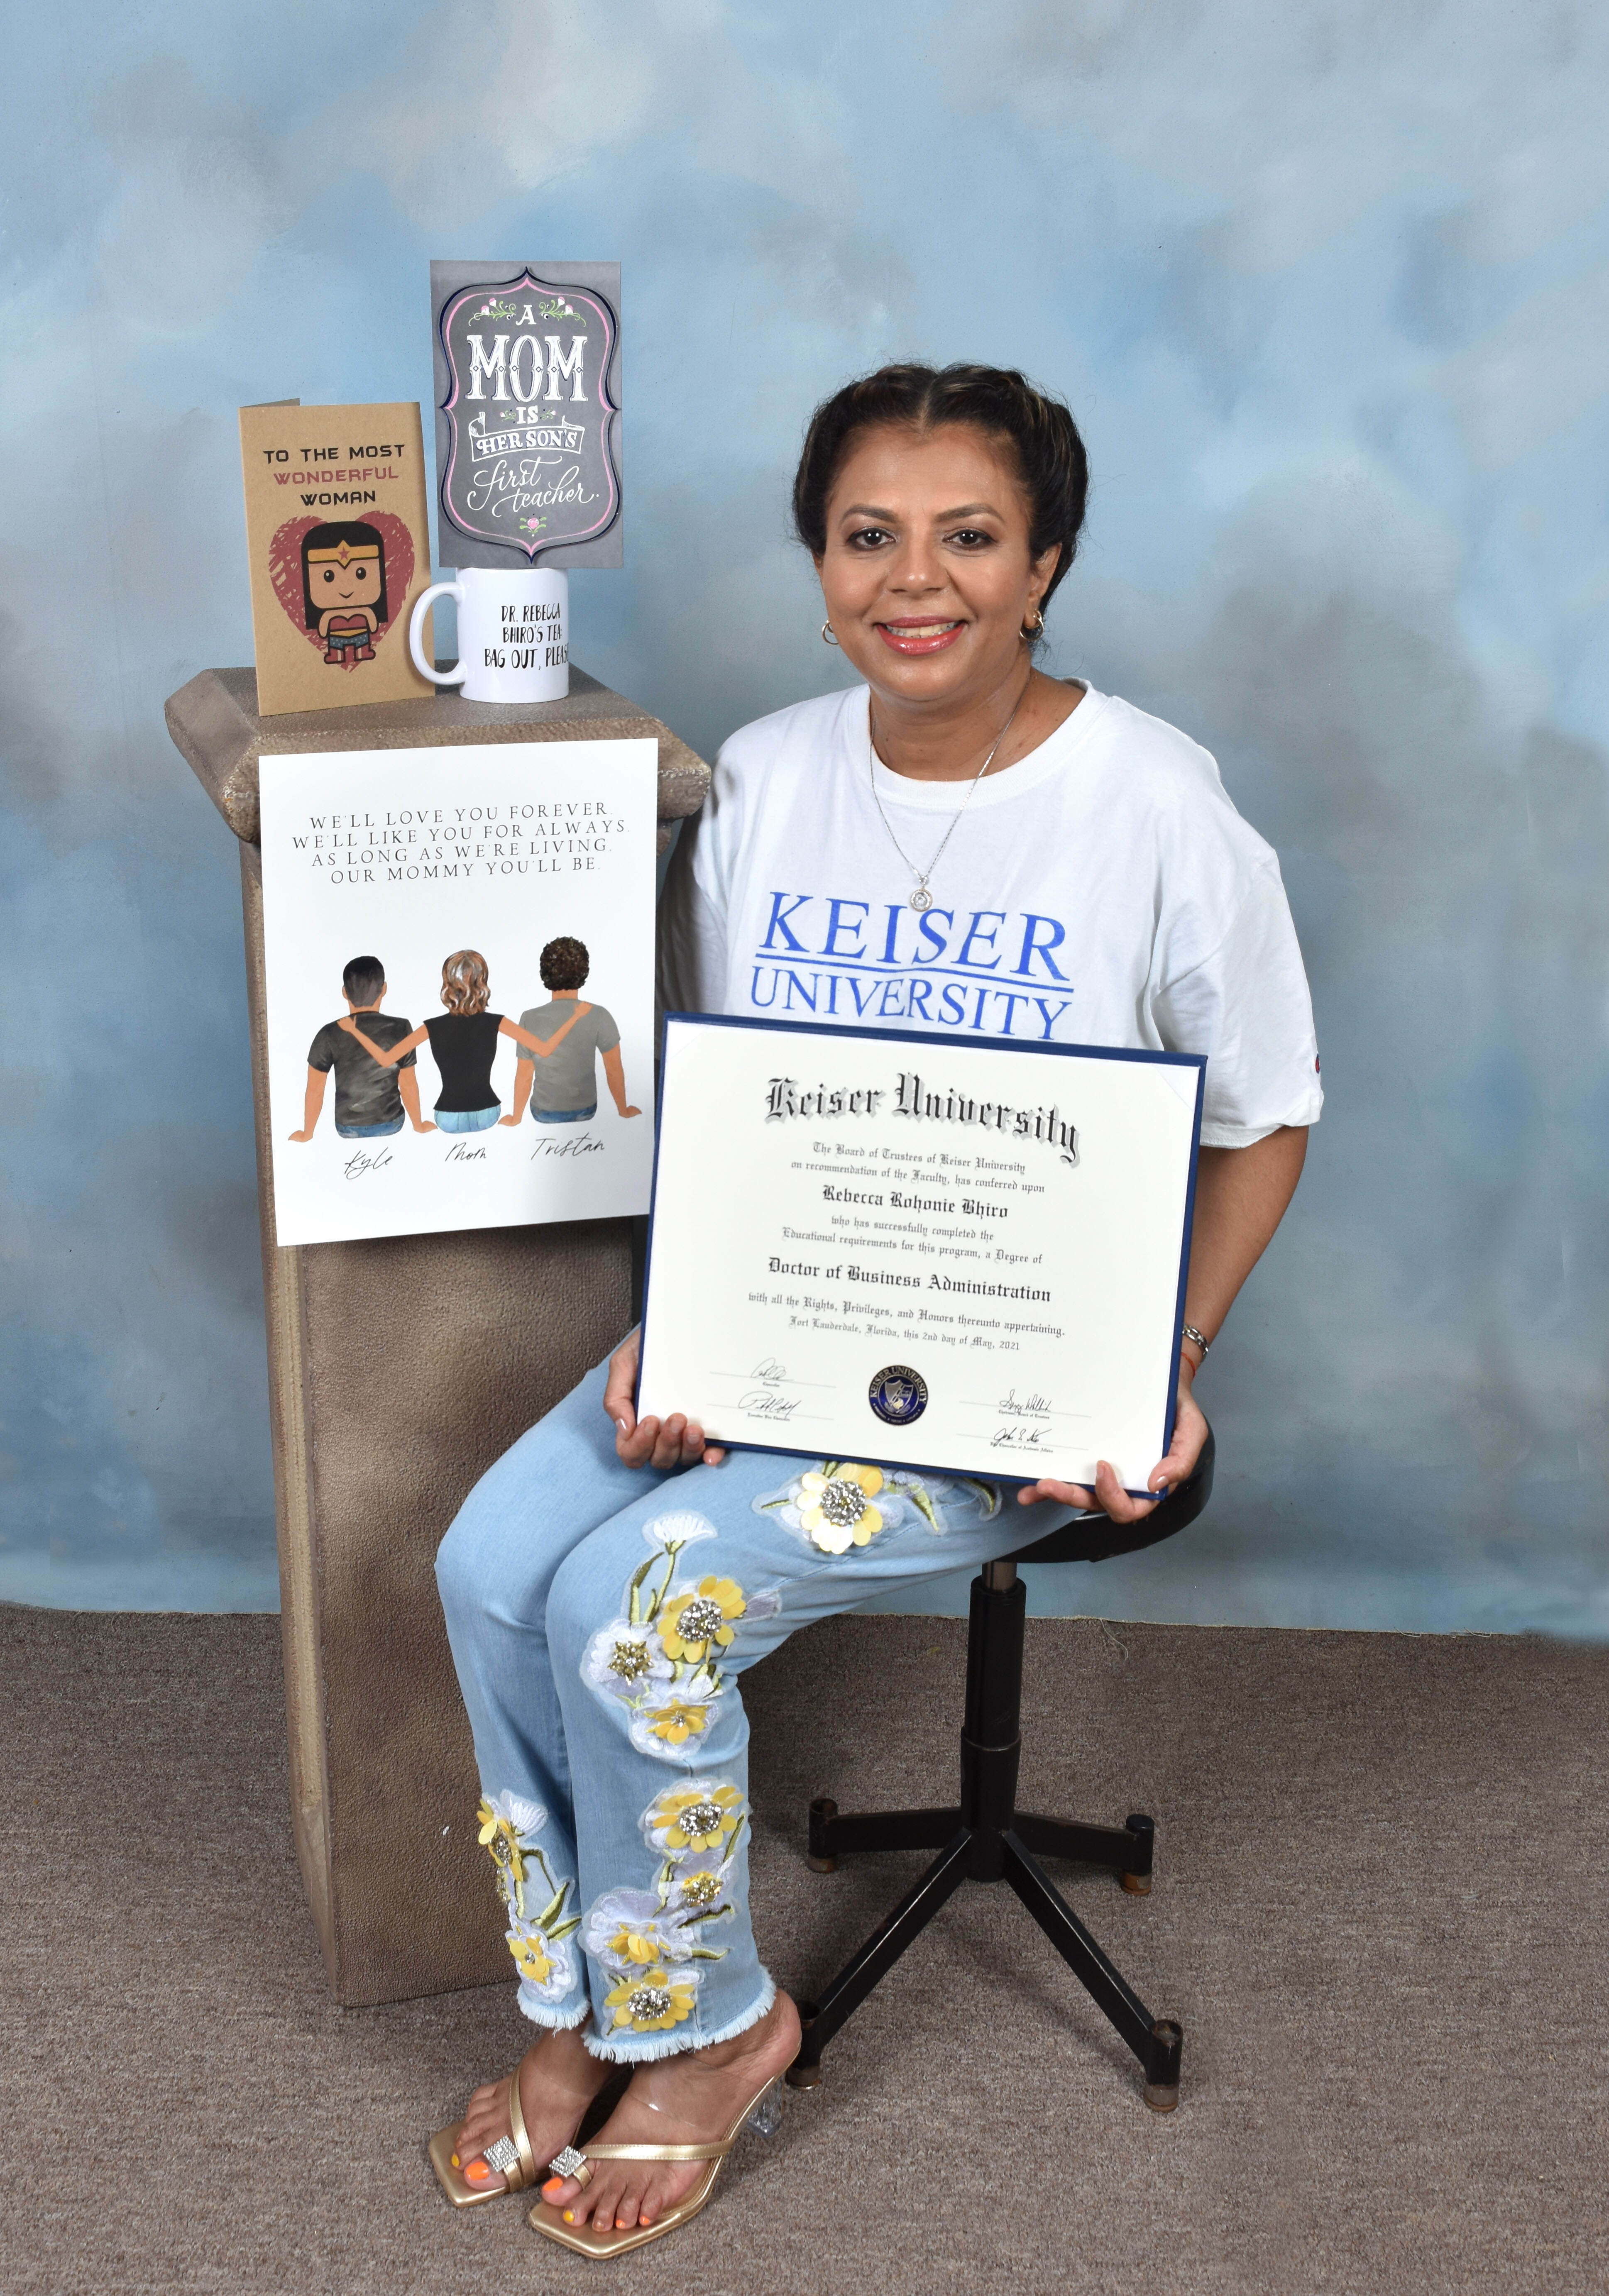 A Keiser University Student’s Story of Overcoming Adversity and Working Towards a Doctorate